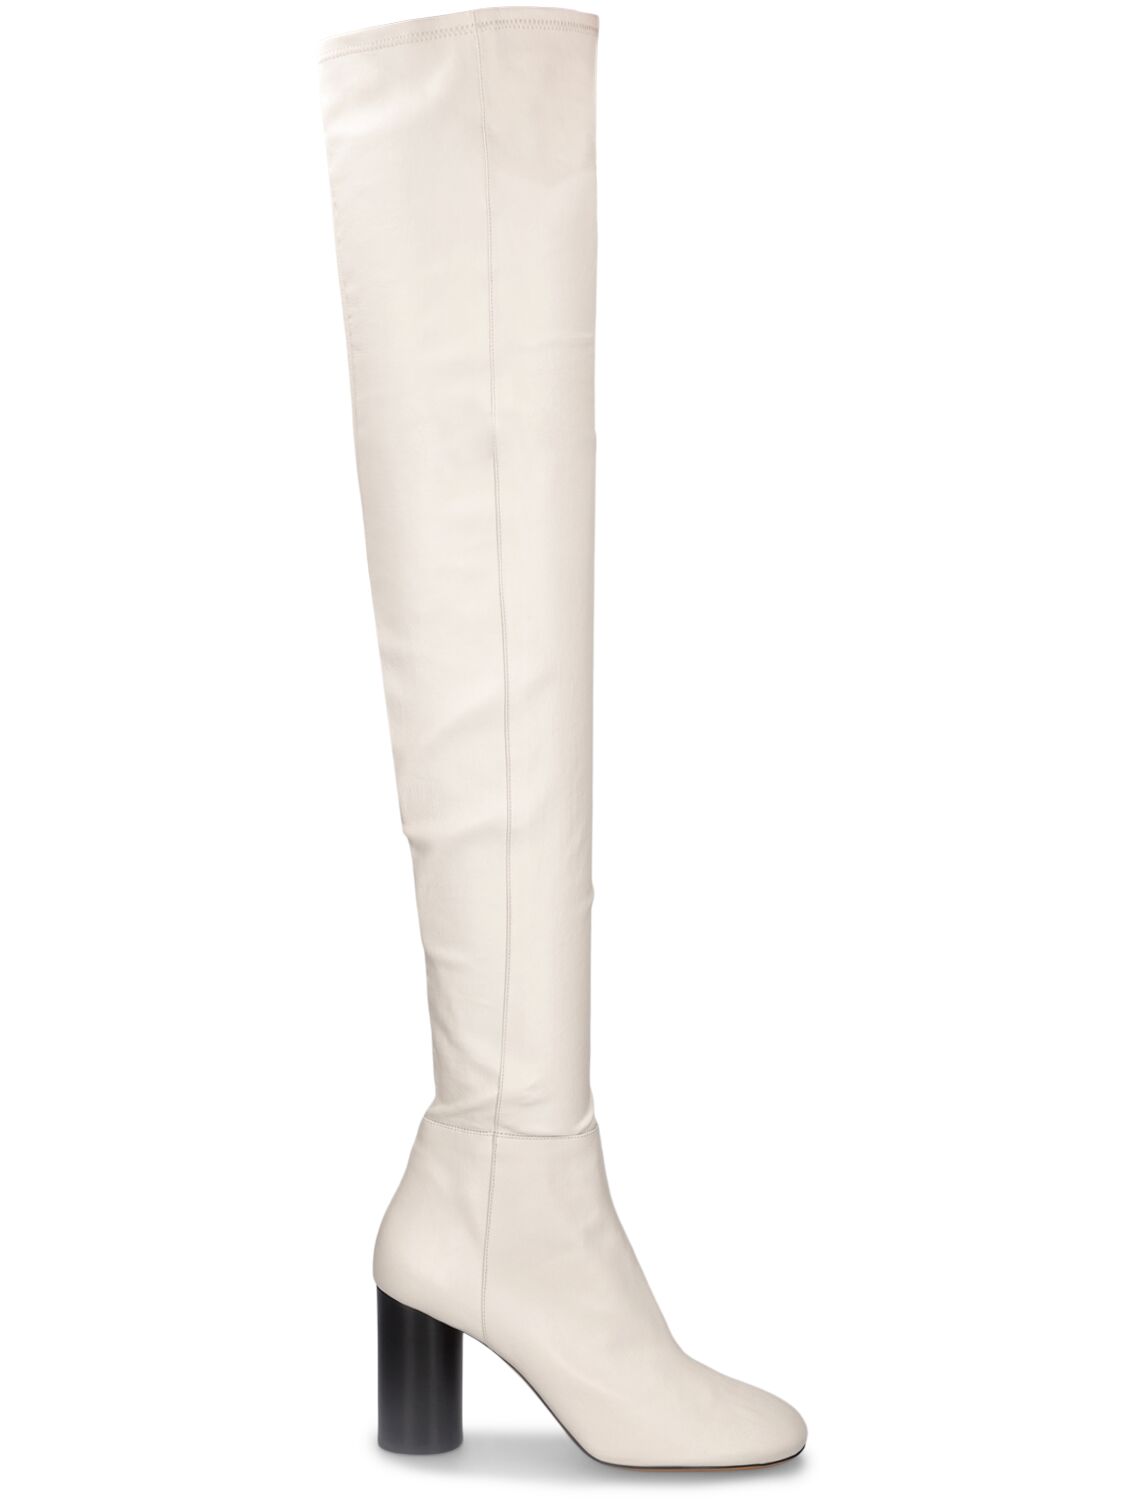 85mm Lelta Leather Knee High Boots